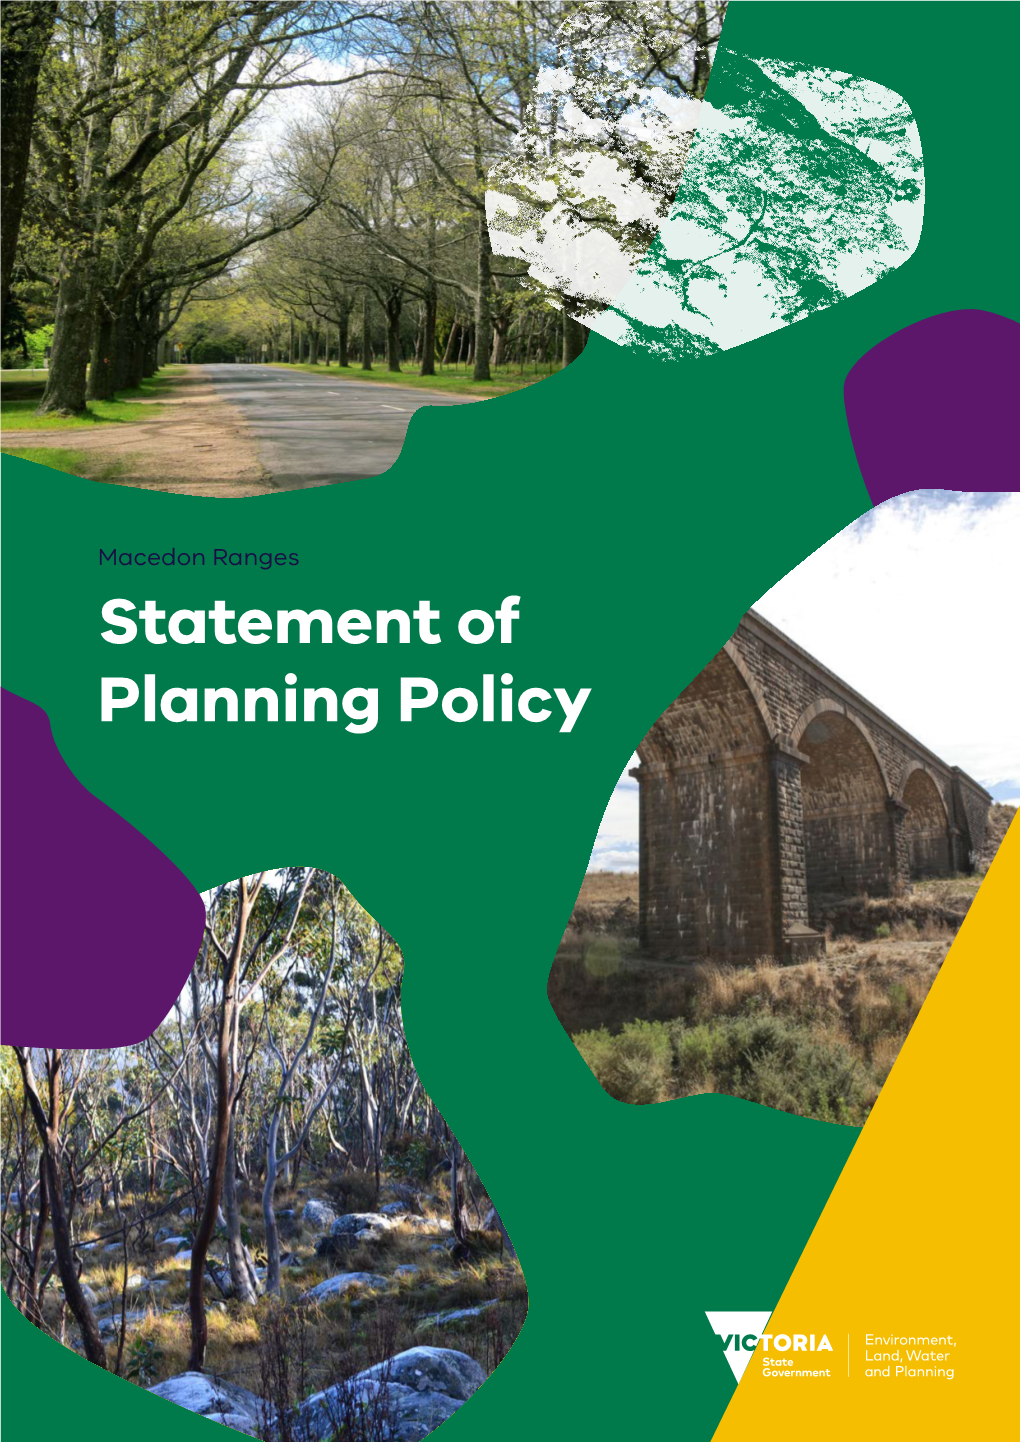 Statement of Planning Policy © the State of Victoria Department of Environment, Land, Water and Planning 2019